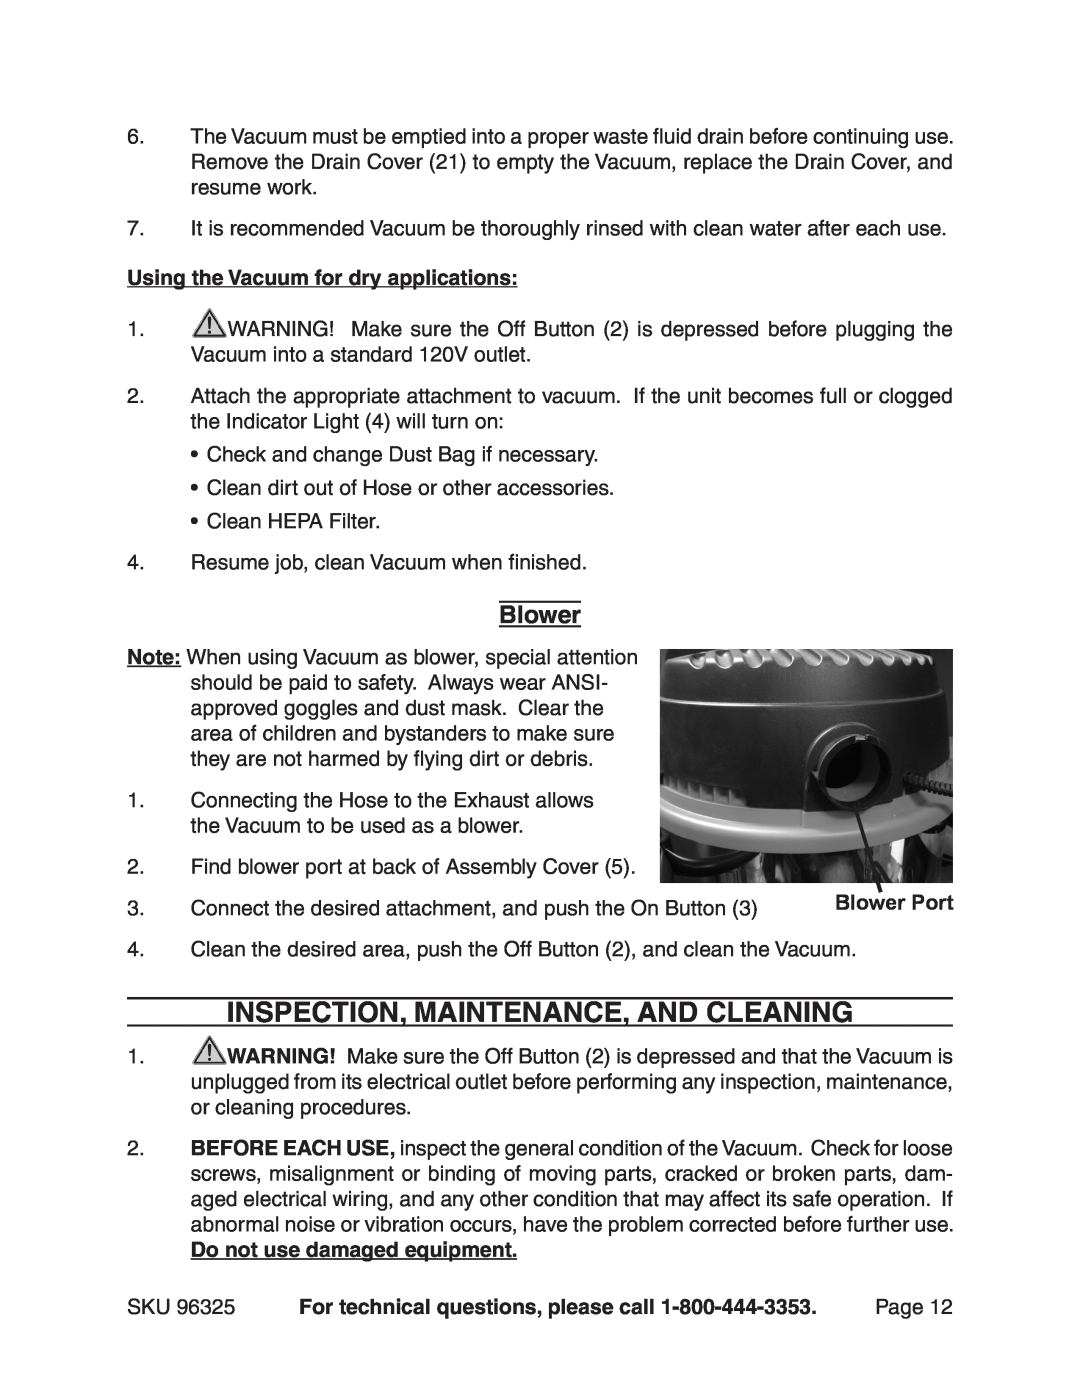 Harbor Freight Tools 96325 manual Inspection, Maintenance, And Cleaning, Blower, Using the Vacuum for dry applications 